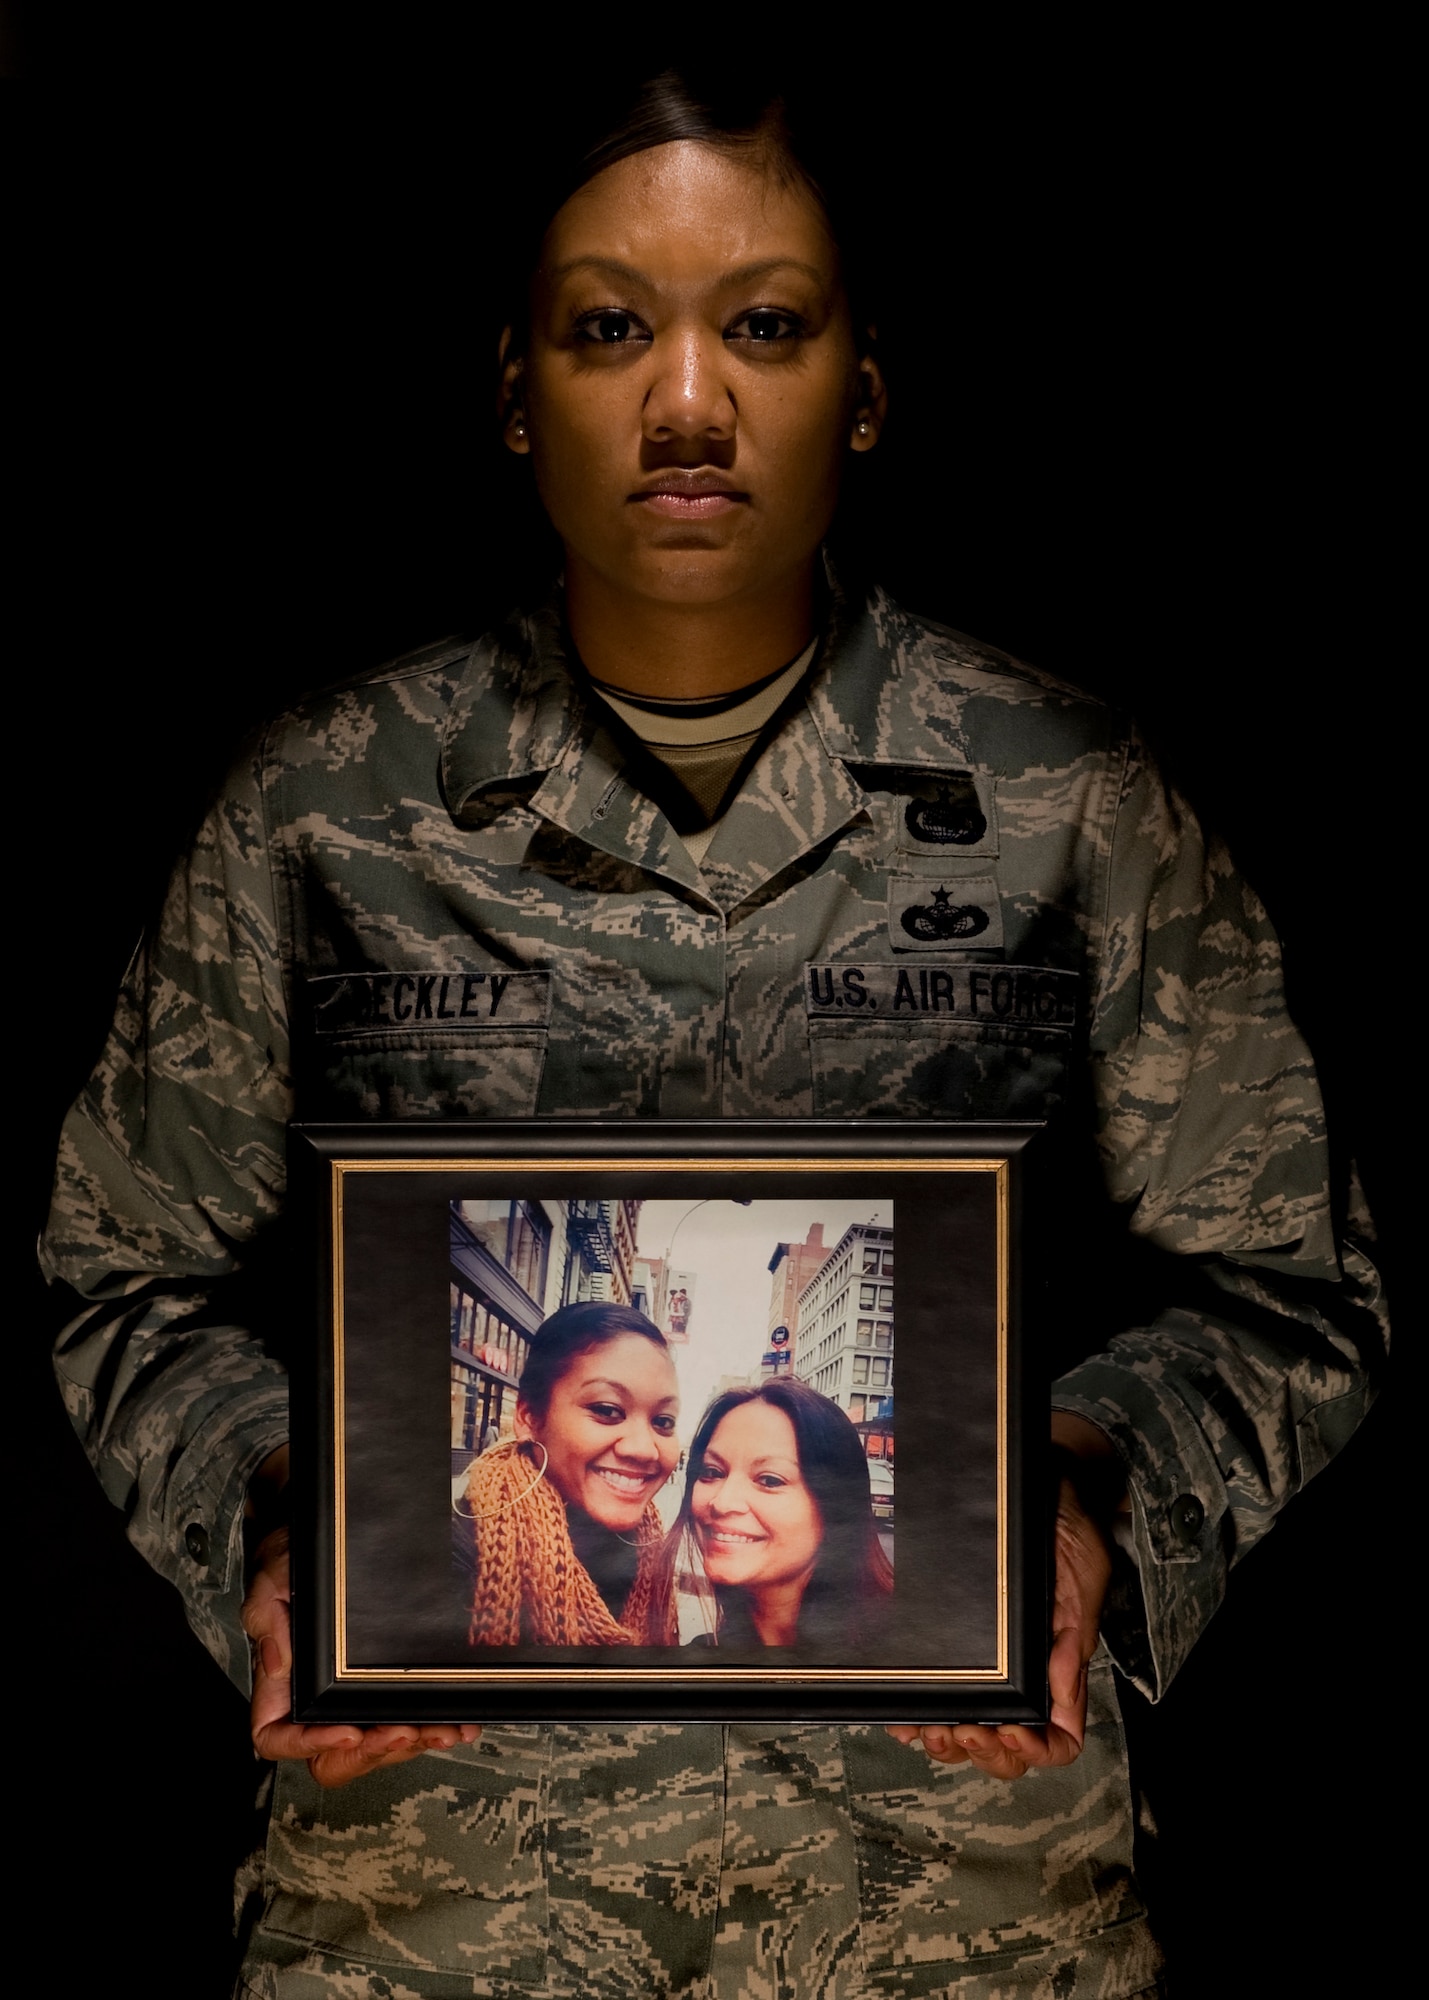 Tech. Sgt. Shamika Beckley poses with a photo of her and her sister, Raquel Calleja, Mar. 4, 2015, at Dover Air Force Base, Del. Beckley’s sister was killed by a drunk driver Dec. 22, 2014, in Long Island, N.Y. Beckley was able to have some of her travel costs, associated with the tragedy, reimbursed by the Air Force Aid Society emergency travel provision that is financed by the Air Force Assistance Fund. Beckley is the 436th Operations Support Squadron NCO in charge unit intelligence. (U.S. Air Force photo/Airman 1st Class William Johnson)